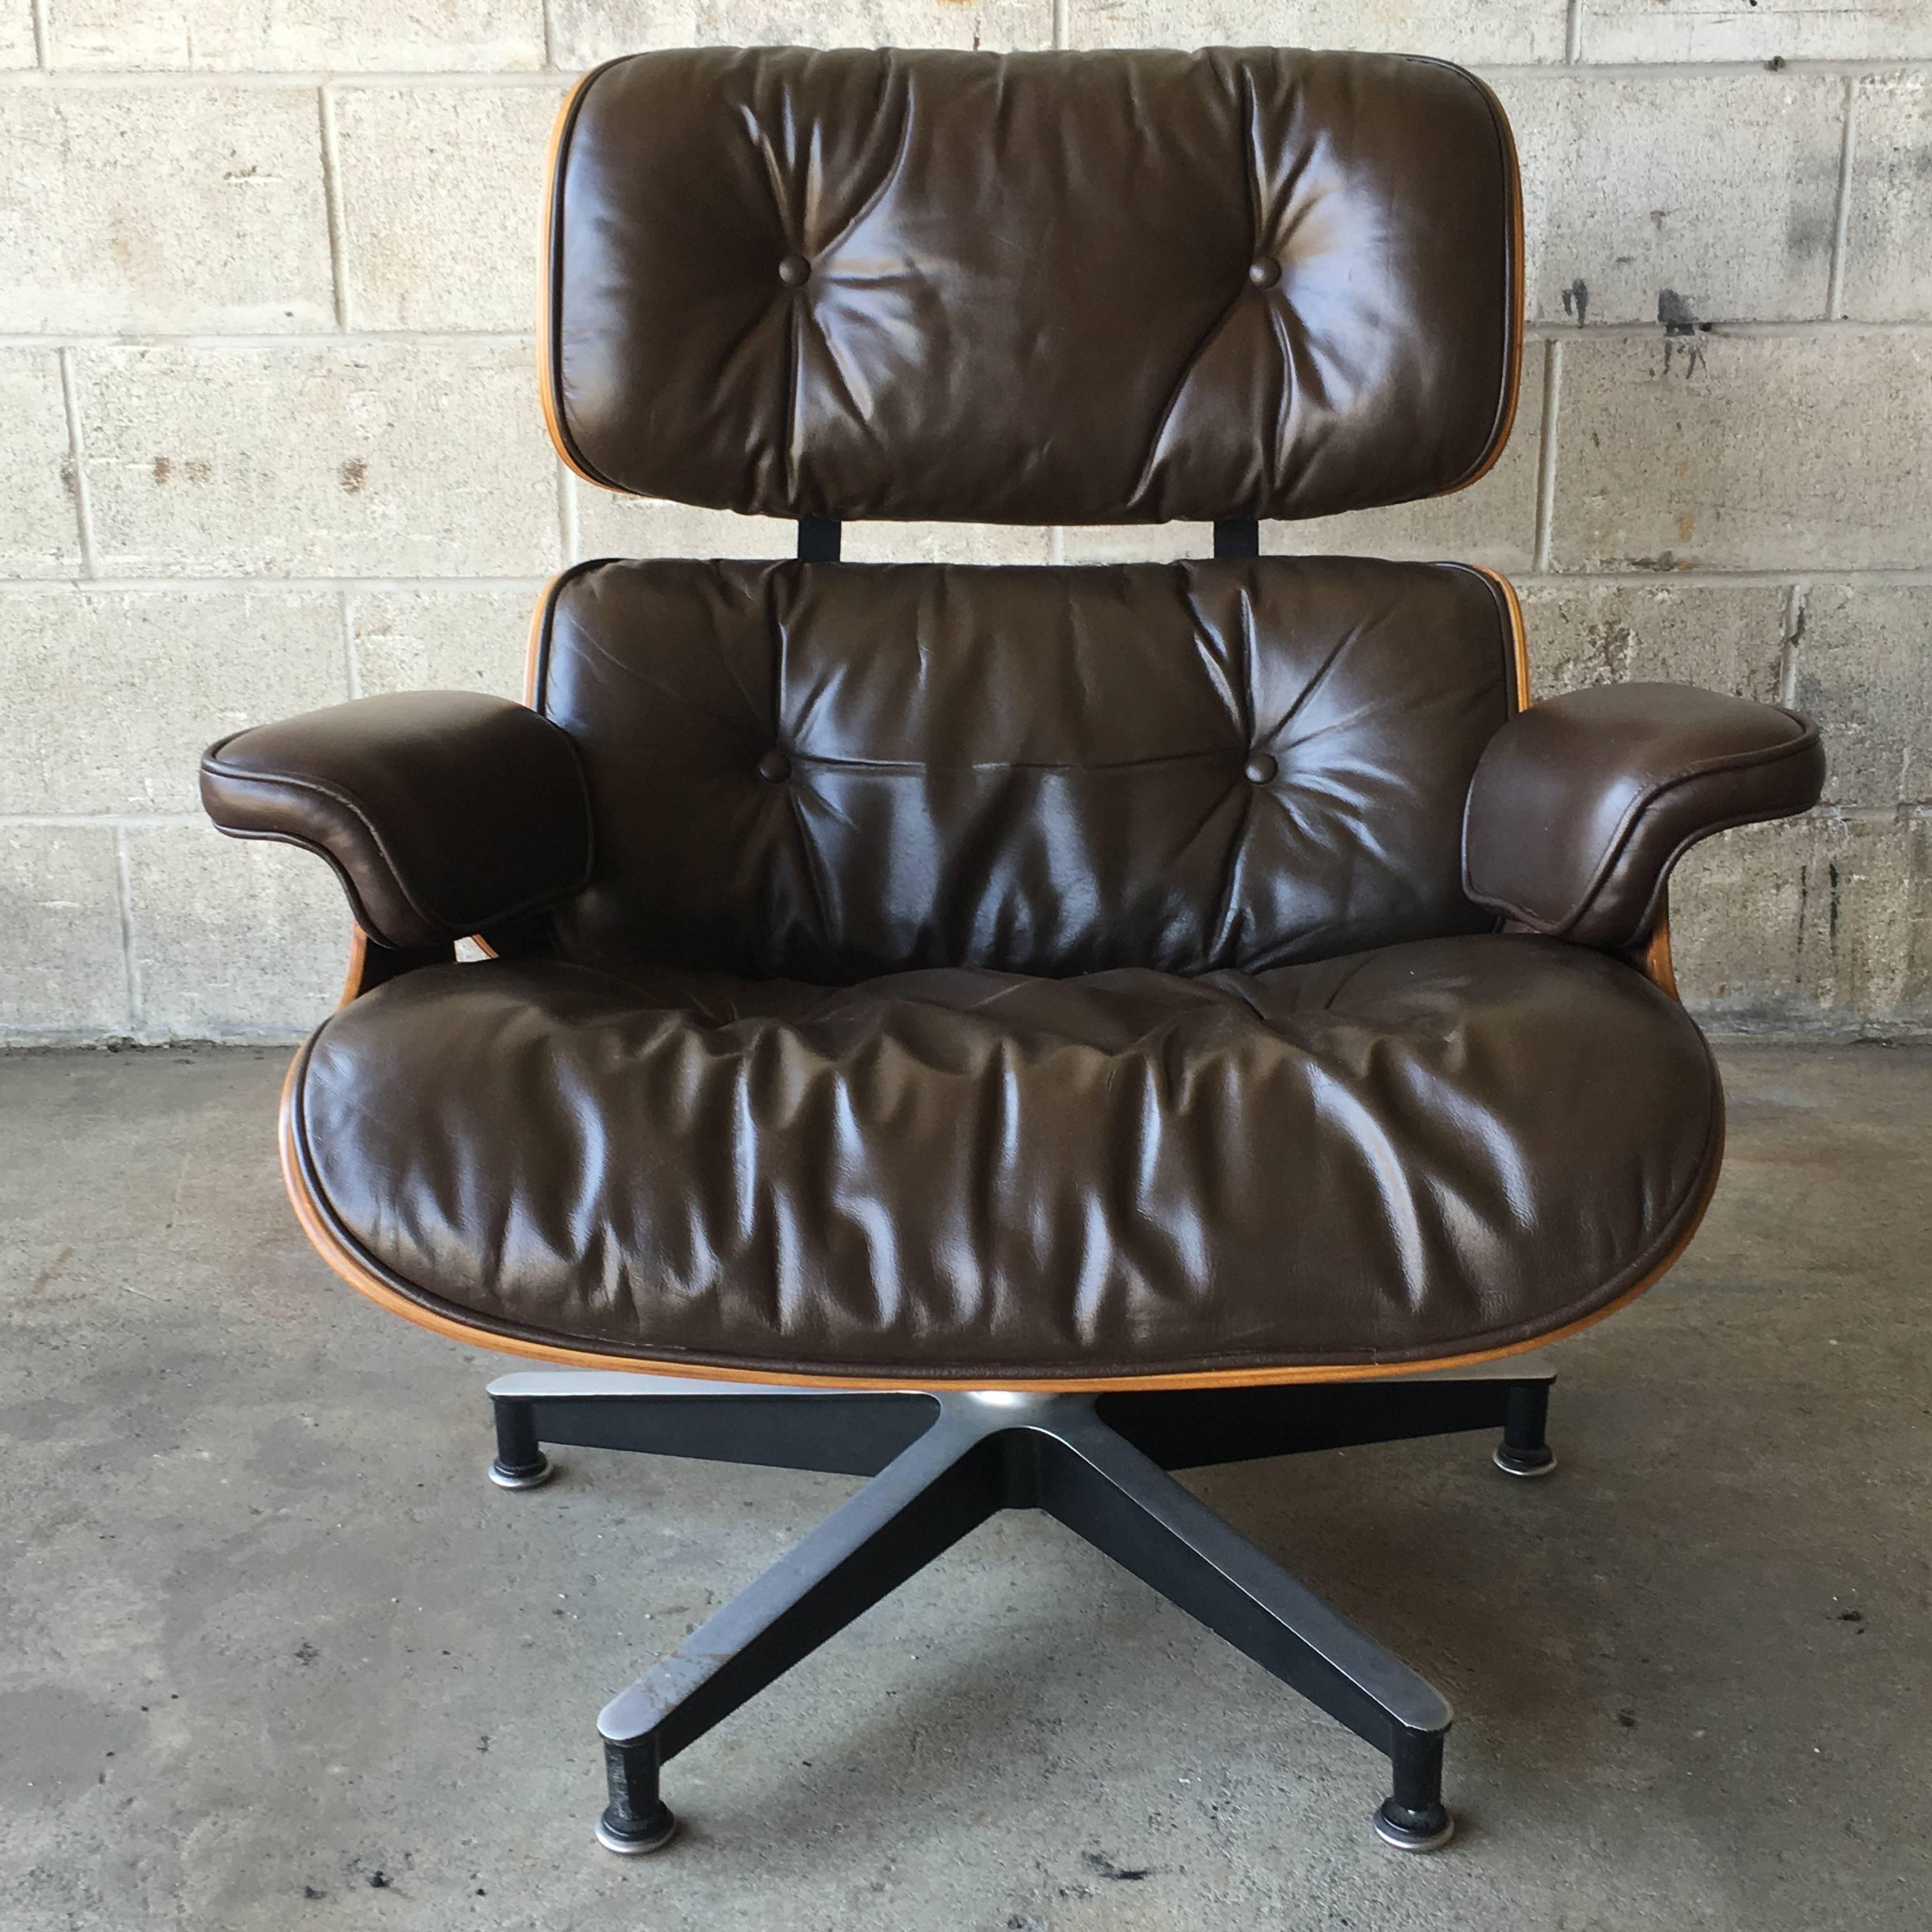 Herman Miller Eames 670/671 lounge chair and ottoman in Brazilian rosewood and brown leather cushions from the 1970s. In excellent condition.